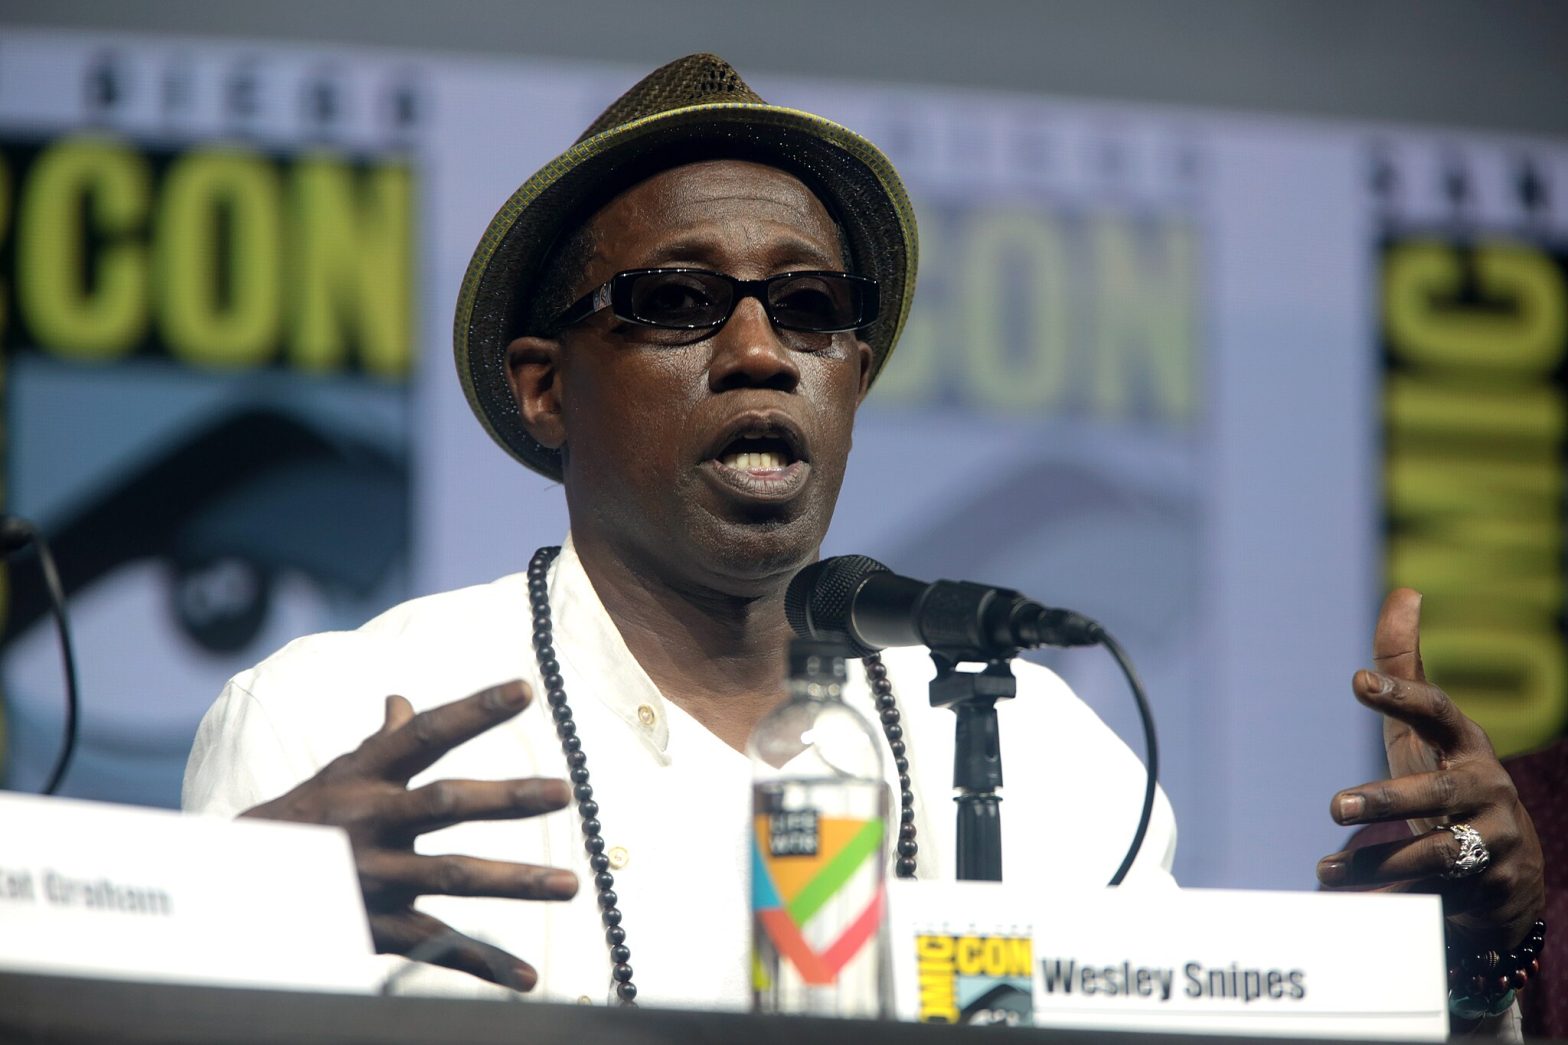 Wesley Snipes speaking at the 2018 San Diego Comic Con International. Attribution: Gage Skidmore from Peoria, AZ, United States of America